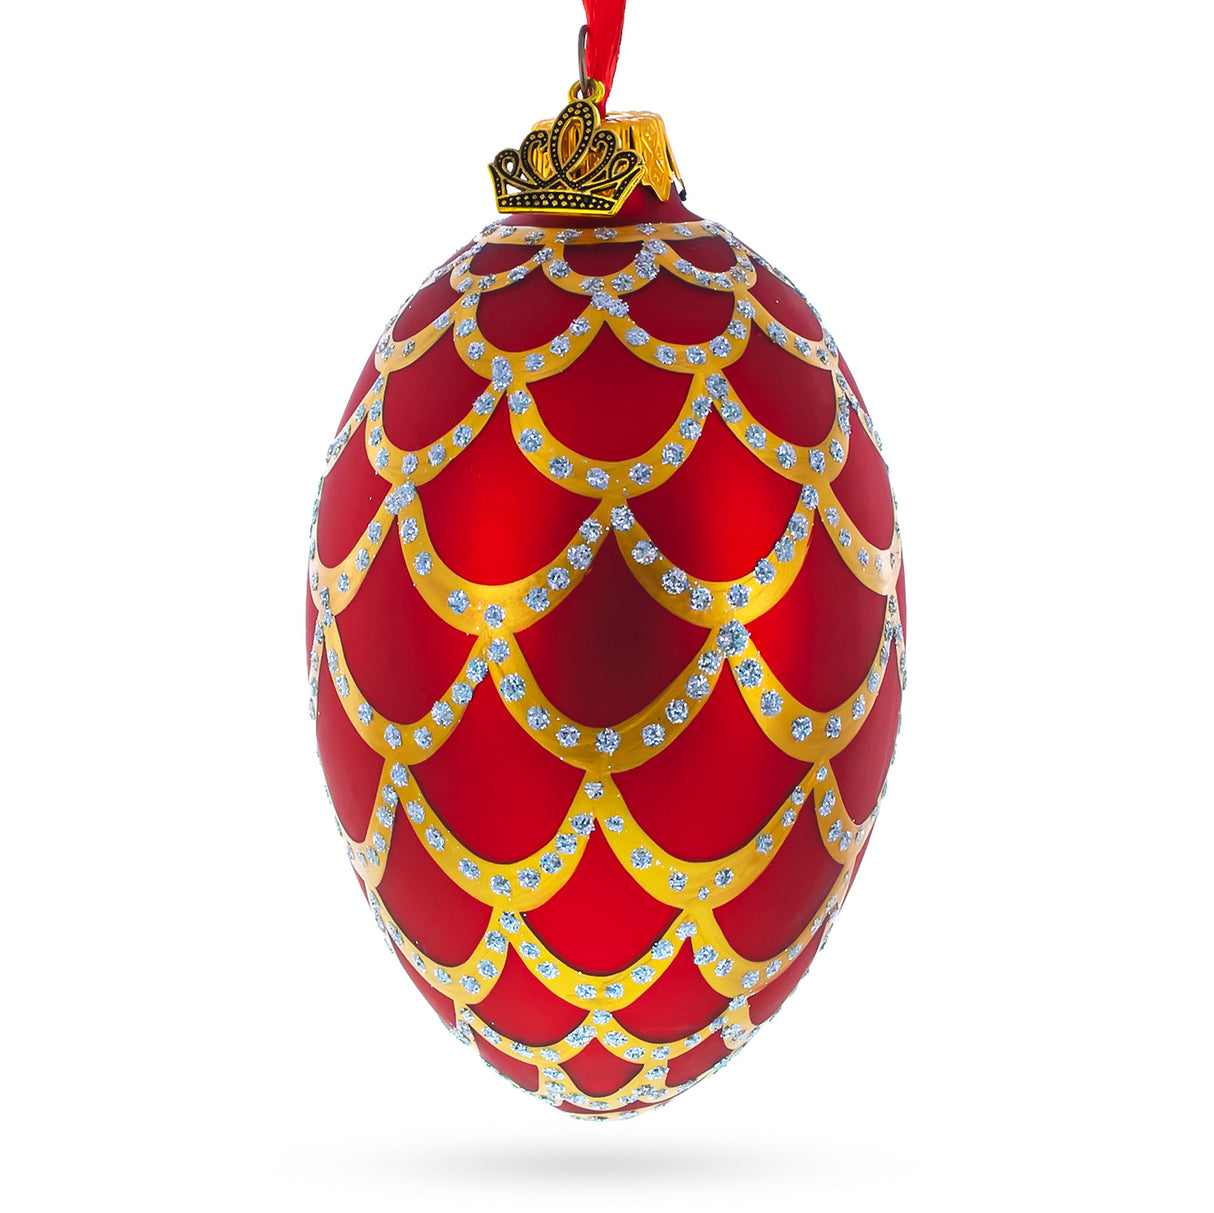 1900 Pine Cone In Red Royal Egg Glass Ornament 4 Inches in Red color, Oval shape